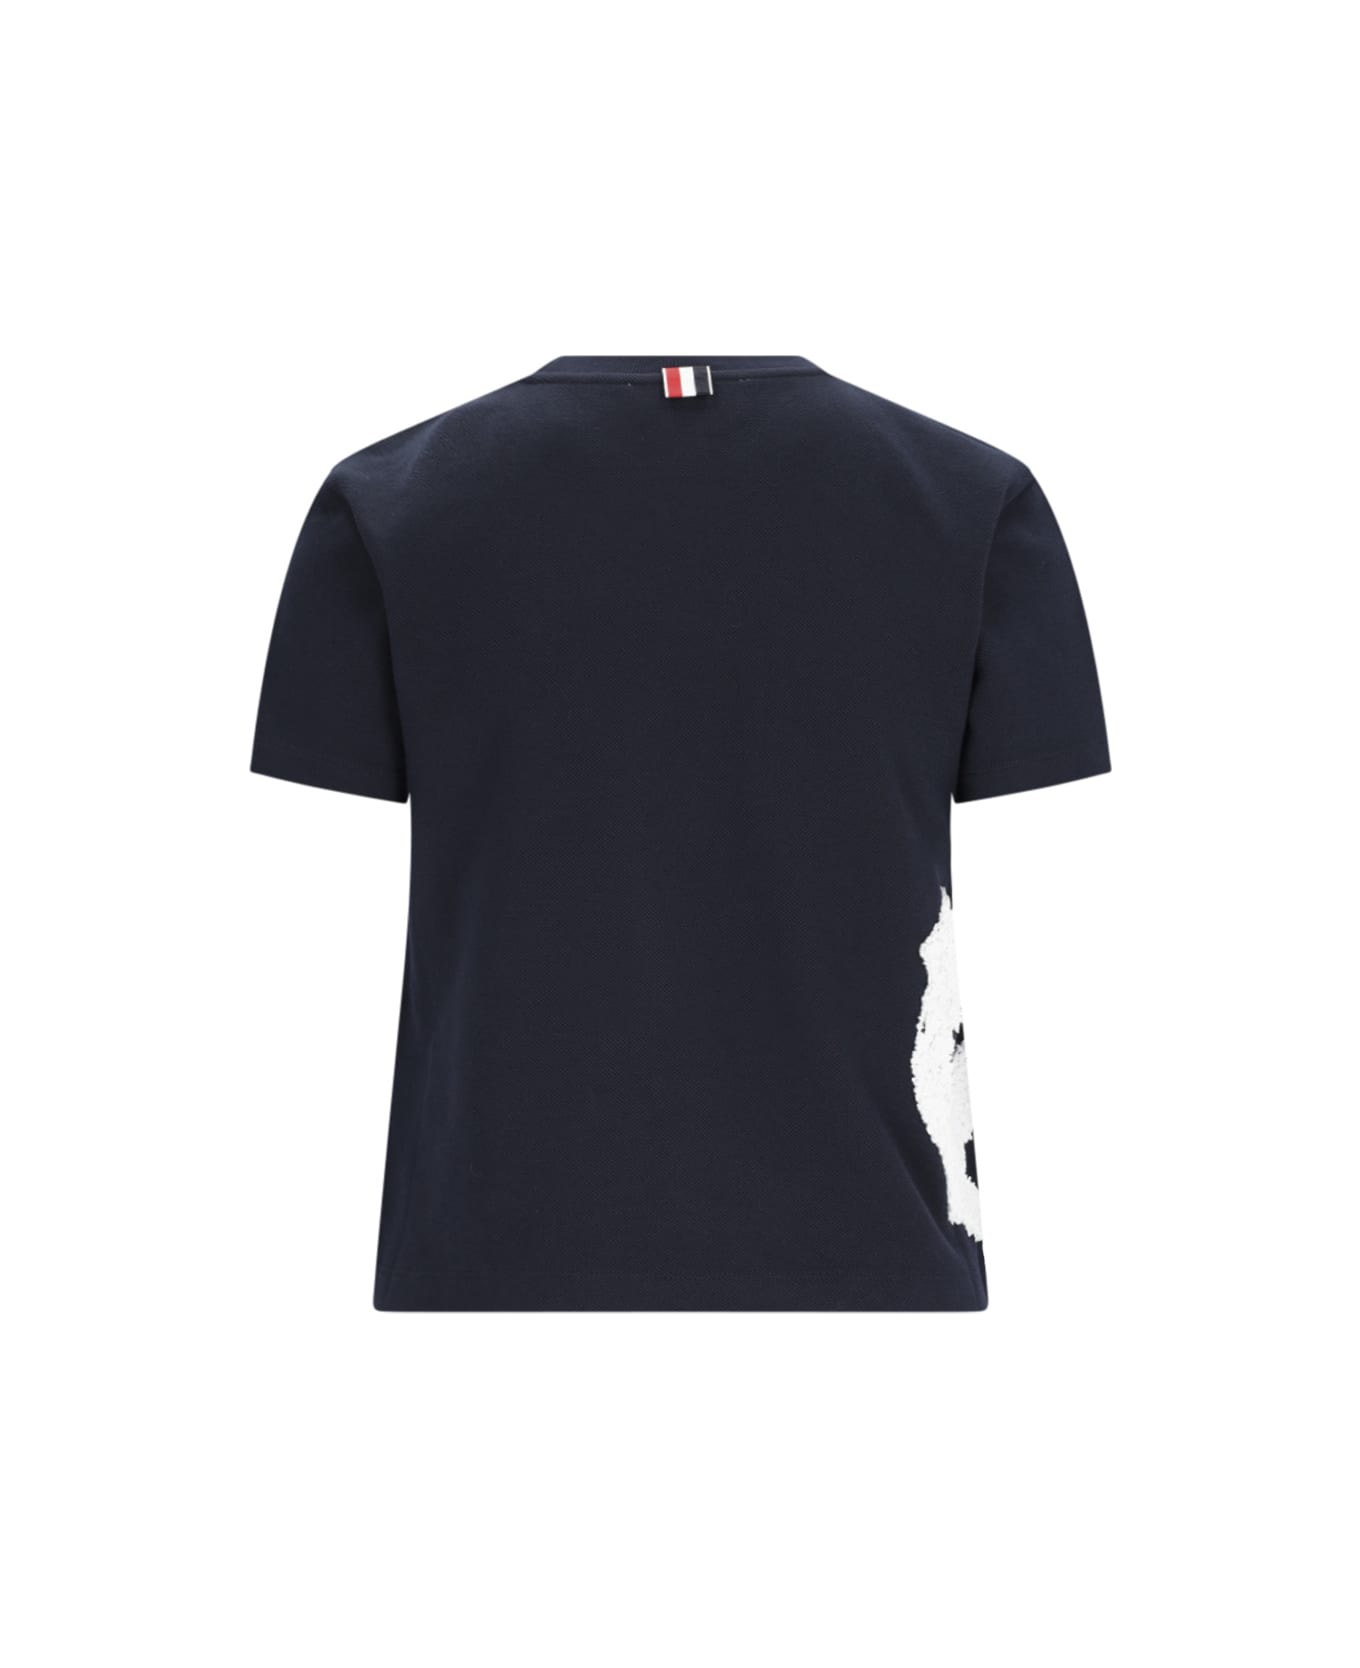 Thom Browne 'embroidery Anchor' T-shirt - Blue